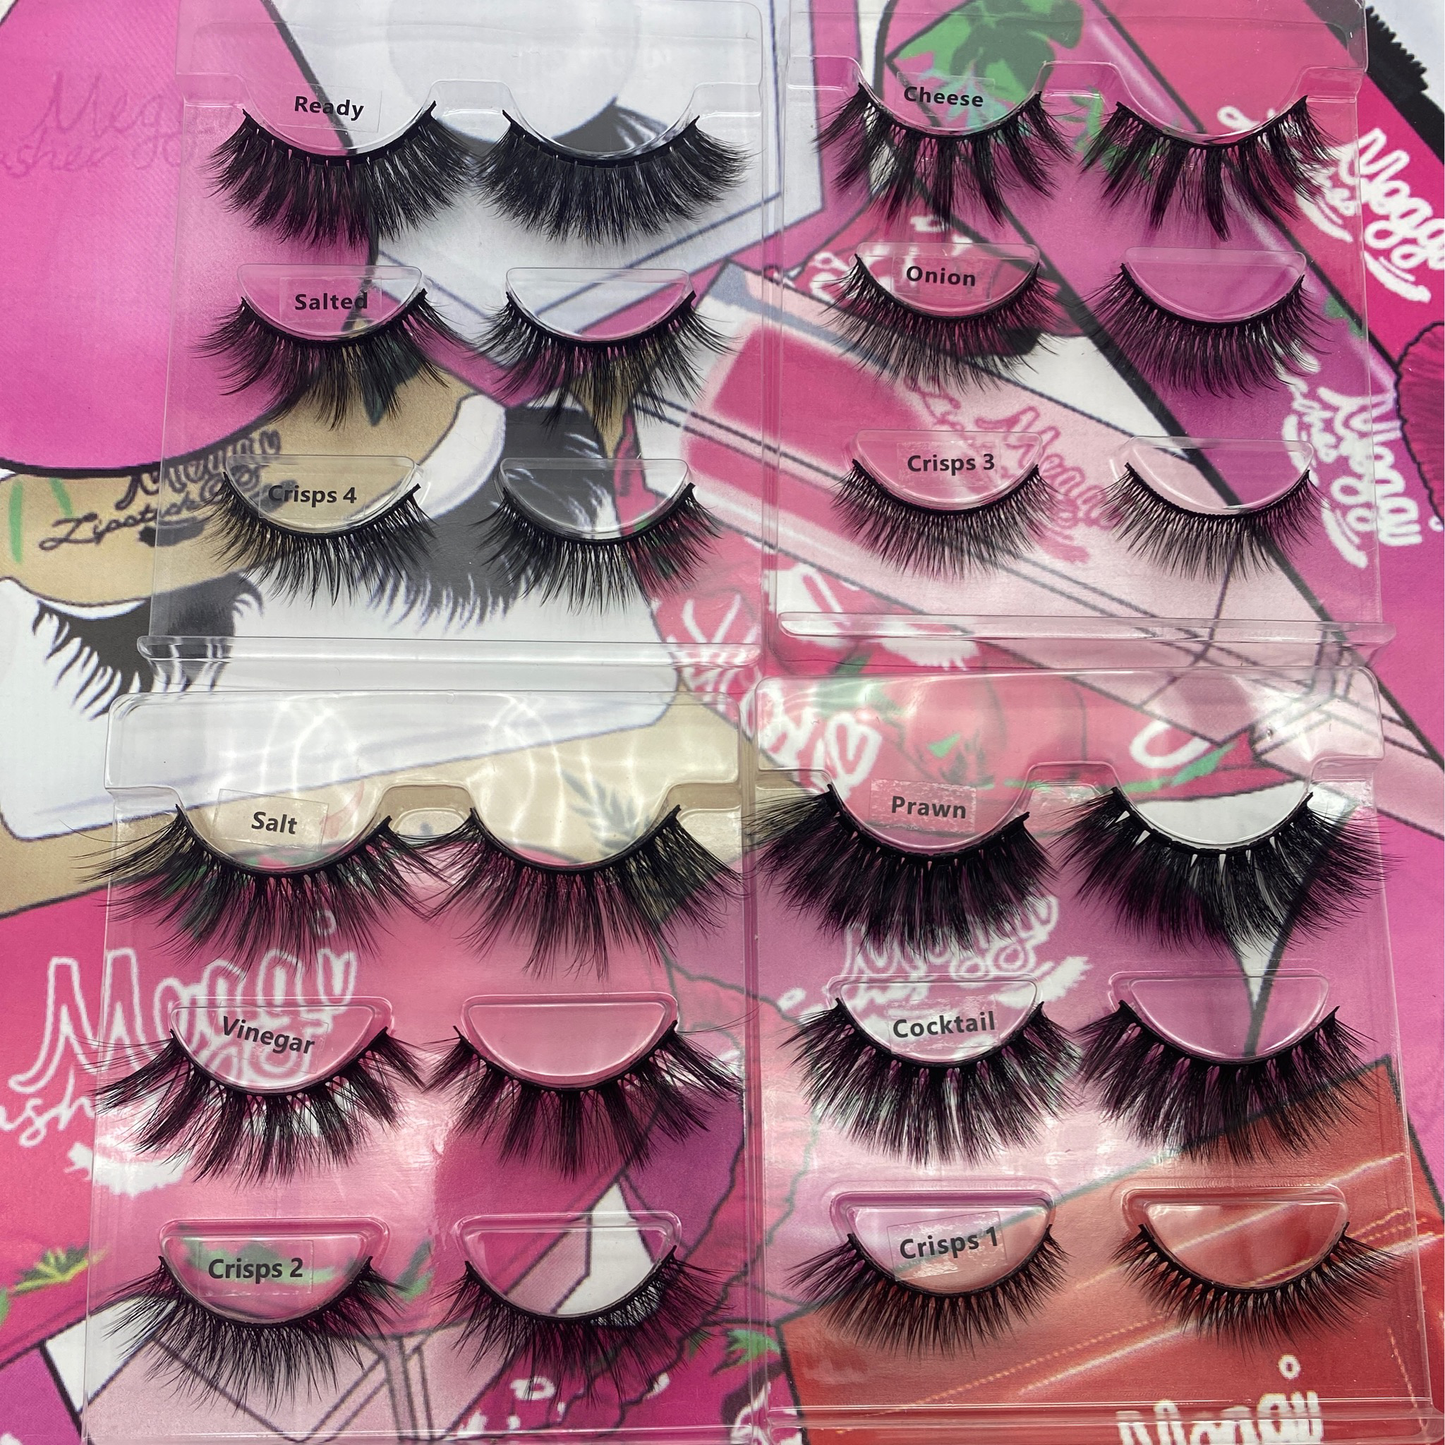 Crisp Collection Multipack (12 pairs of lashes) RRP: £47.96